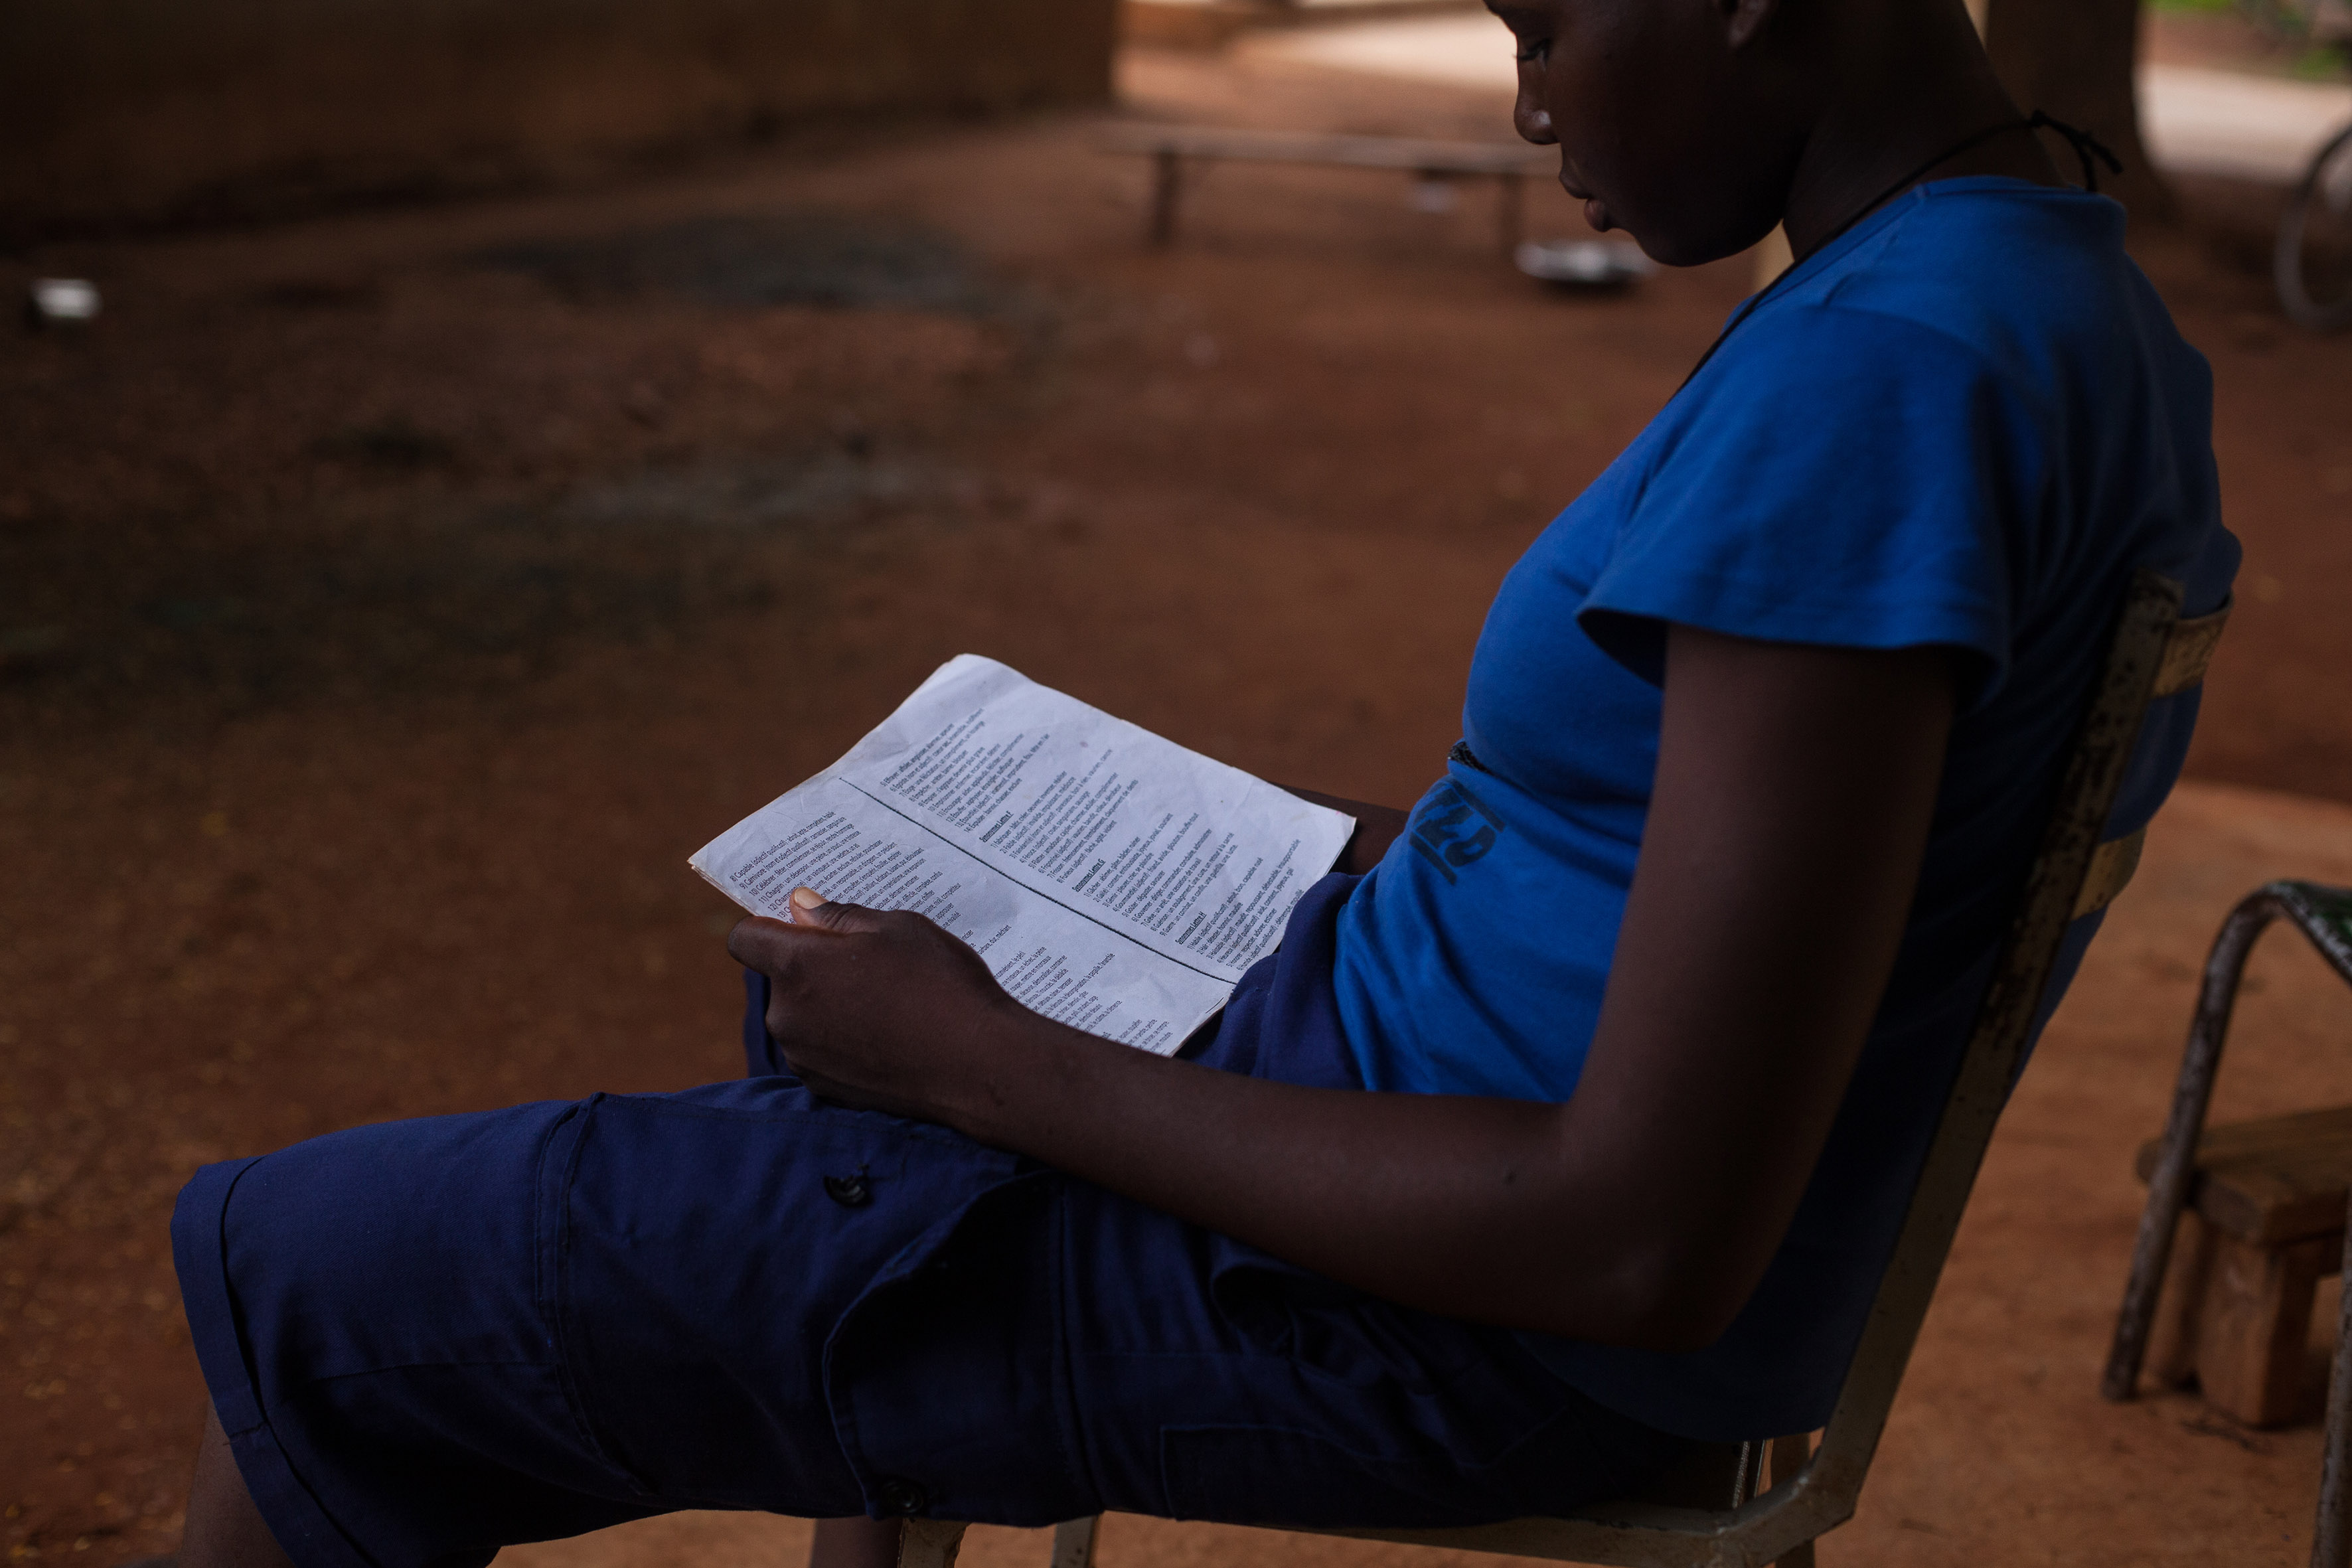 For most girls, early marriage means losing out on their education, but at this shelter for survivors of forced marriage in Kaya city, Burkina Faso, girls are encouraged to continue their education.